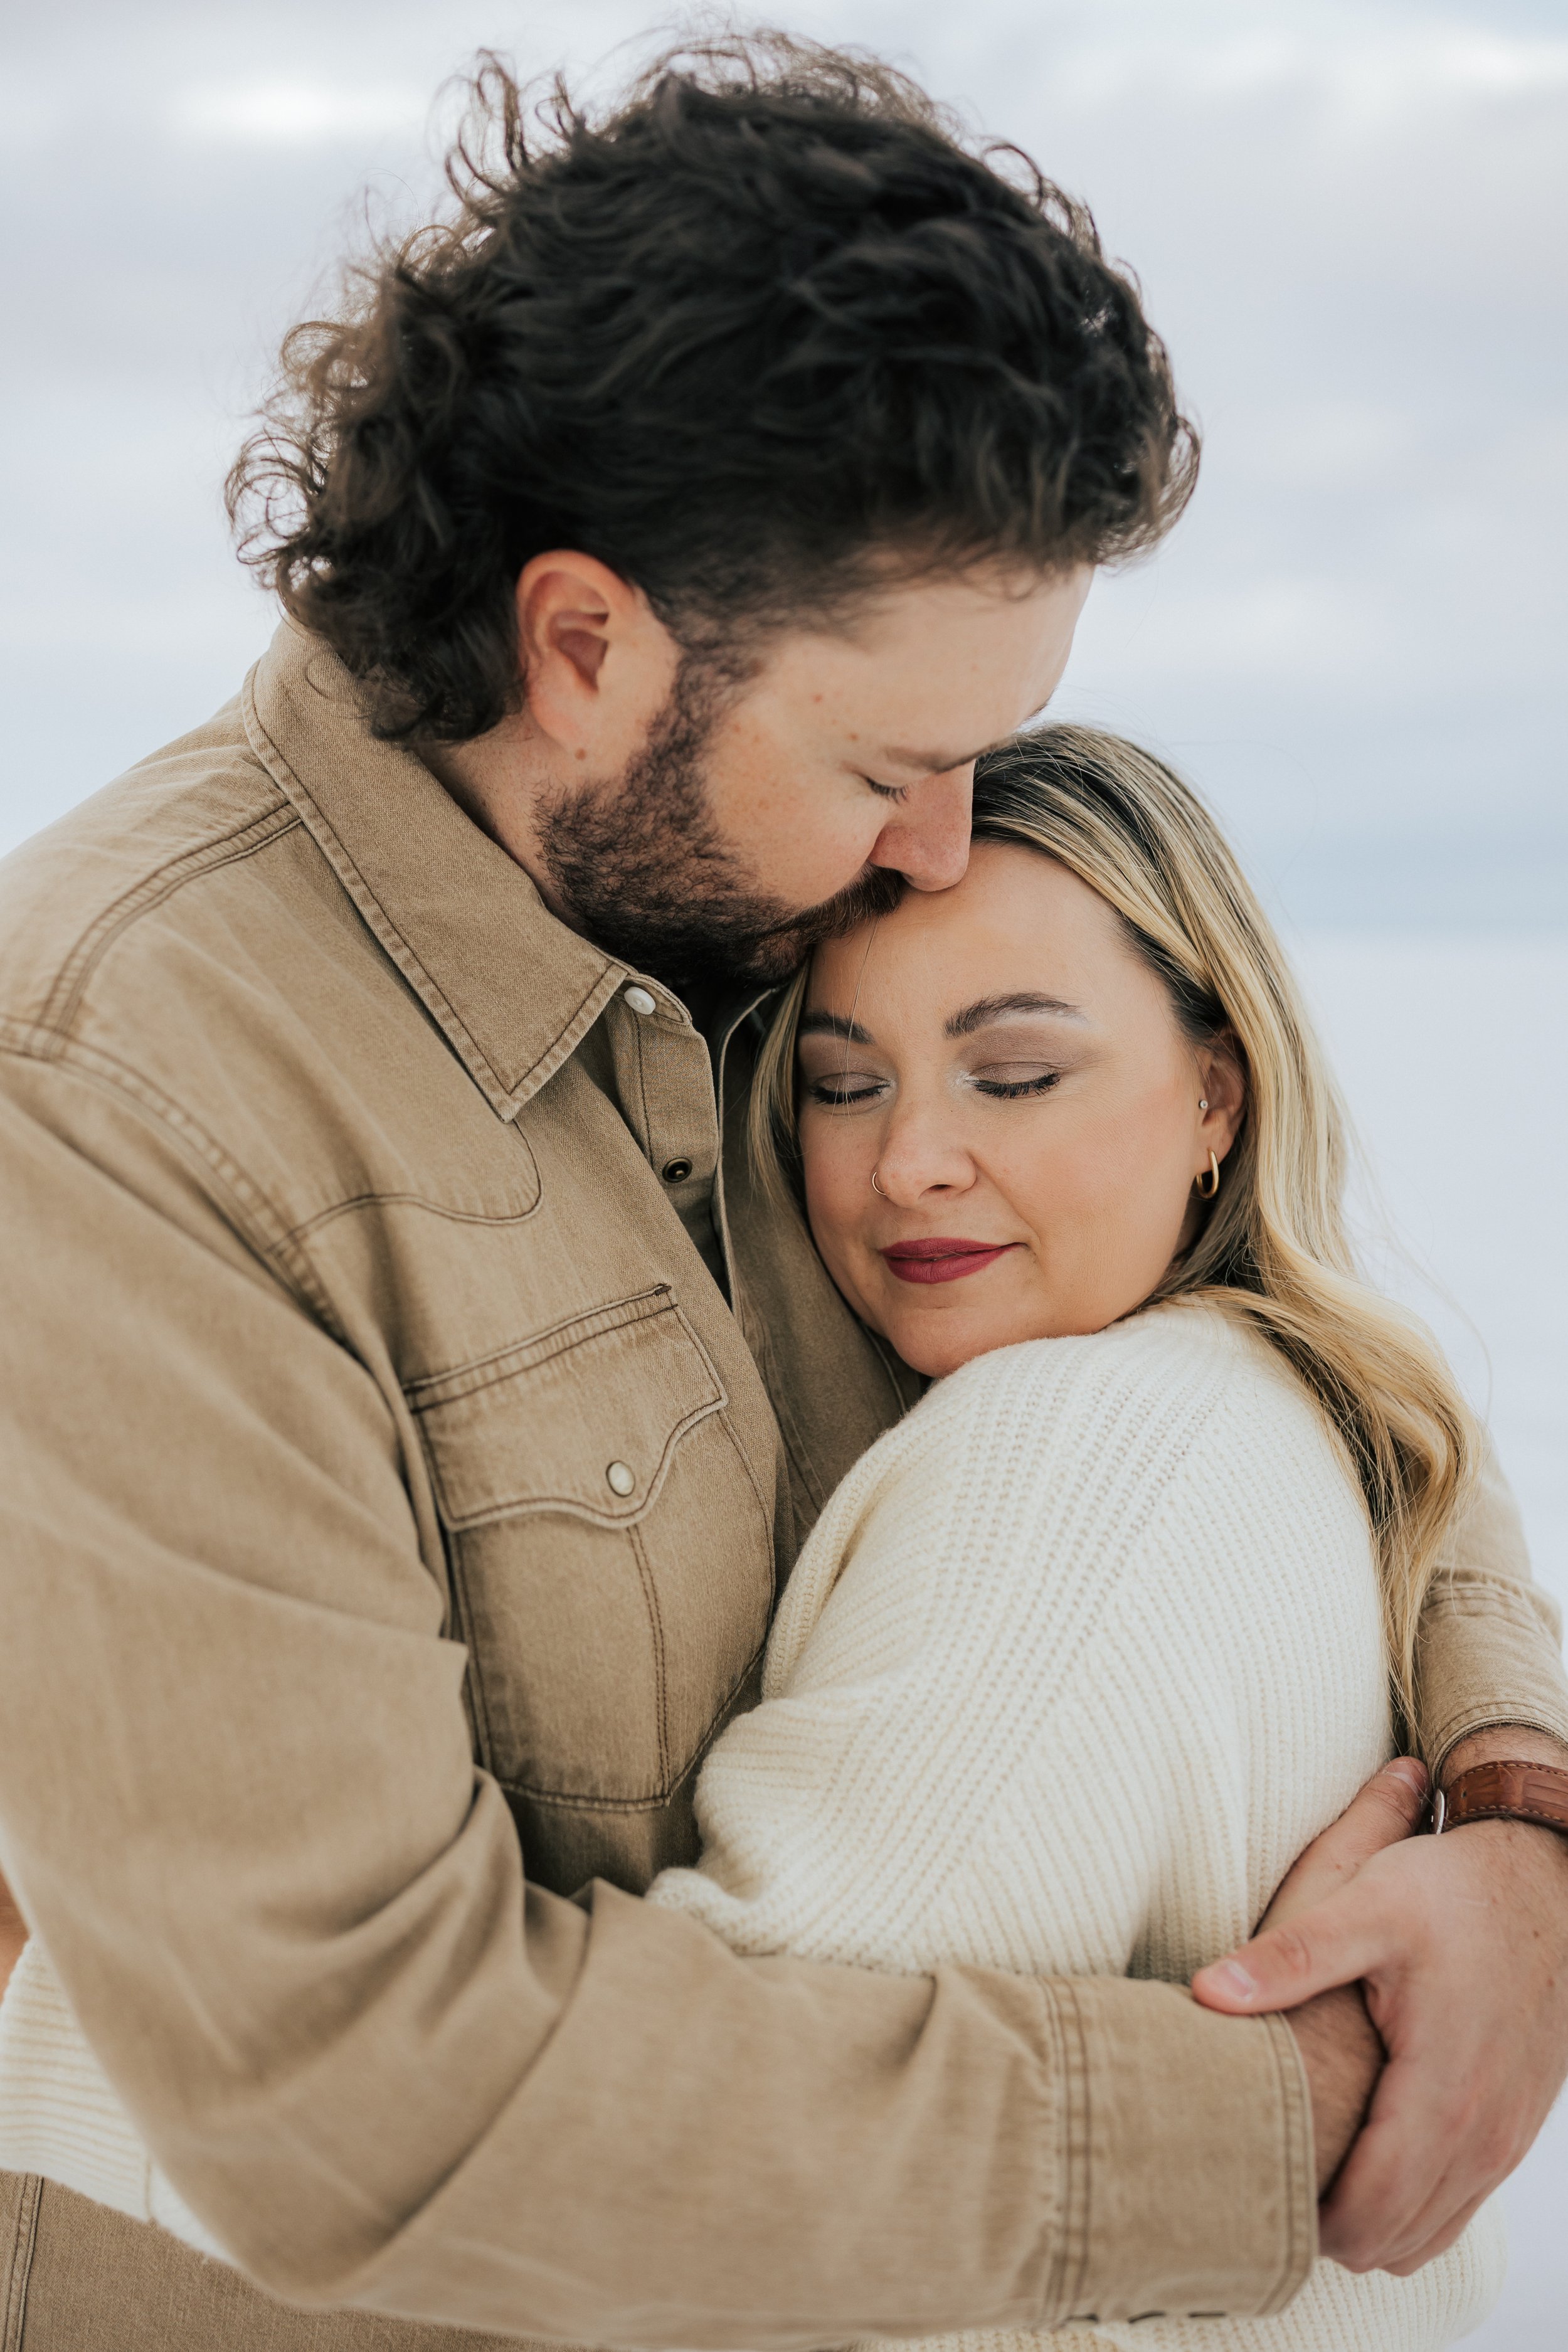  Engaged couple snuggles in a tight hug while he kisses her forehead at the Bonneville Salt Flats near Wendover, Nevada and Salt Lake City, Utah. The Salt Flats are white and the sky is overcast. The mountains show behind. Engagement session at the U